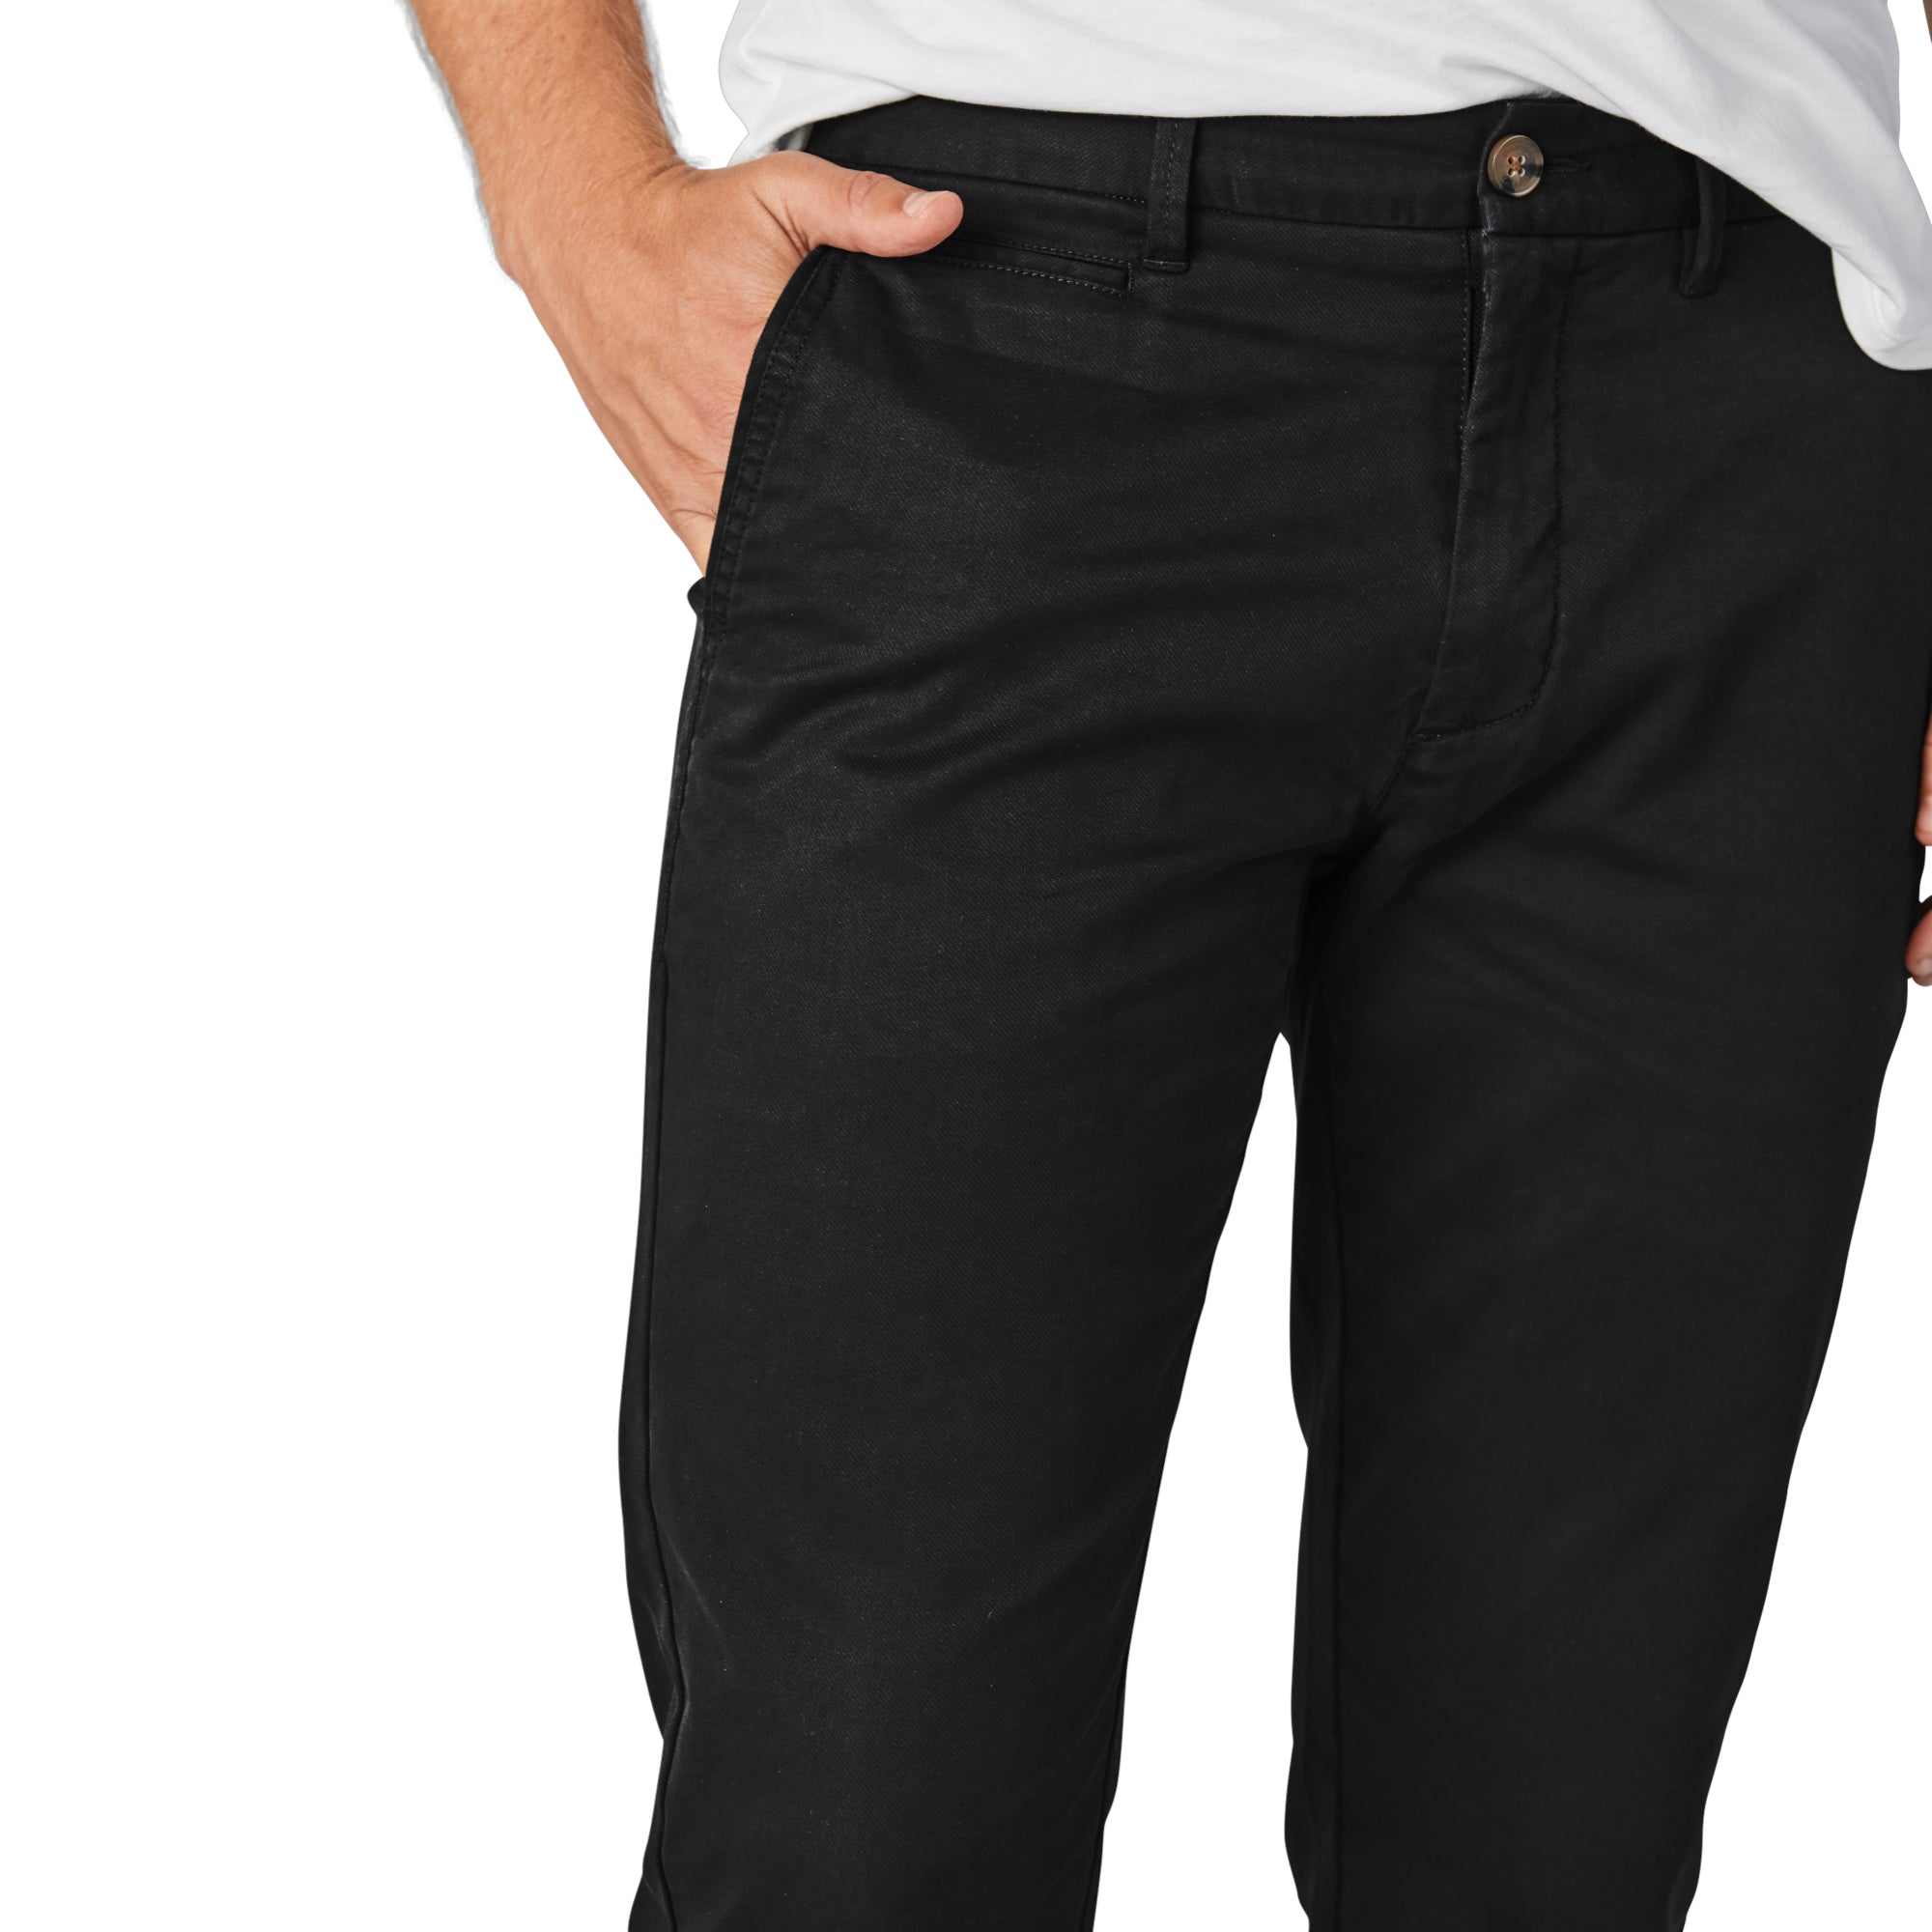 Black Mens Waist Size 40 Trousers & Chinos, Clothing